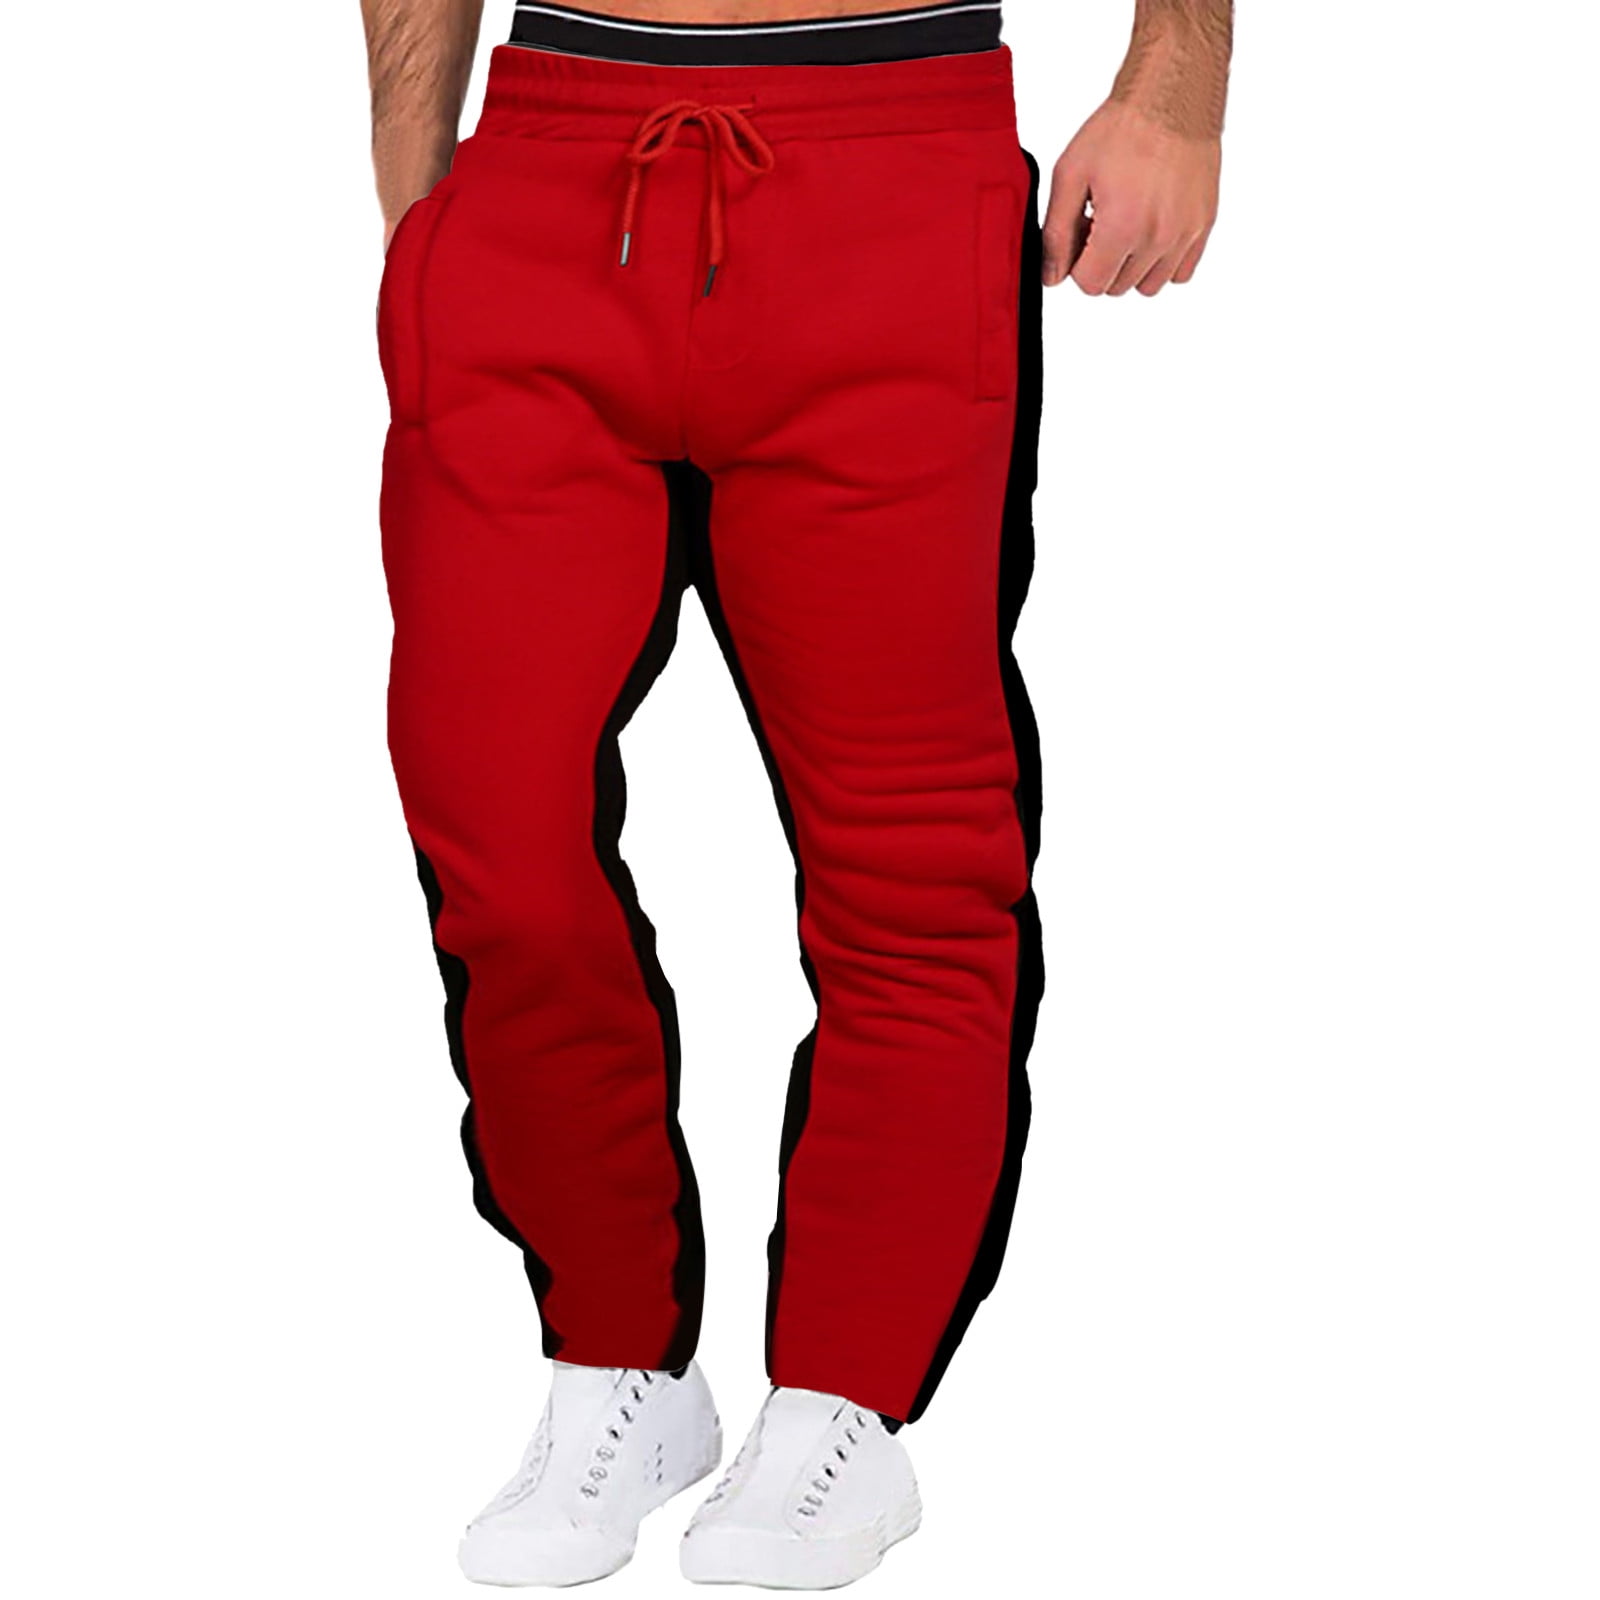 Black Pants For Men Mens Autumn And Winter High Street Fashion